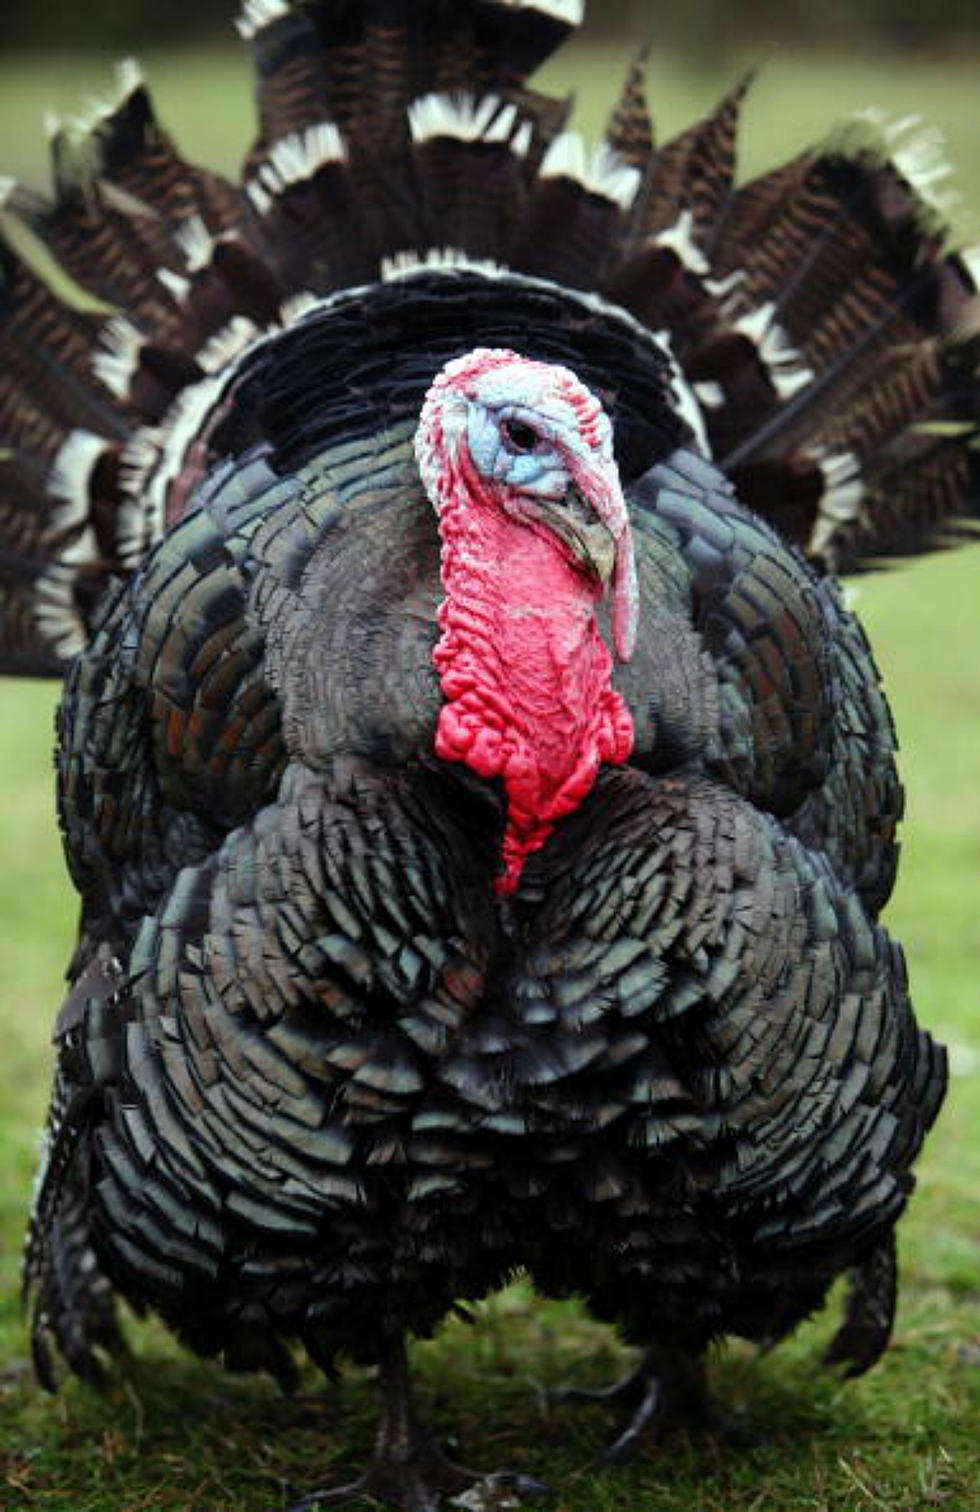 Turkeys Are One of Wyoming’s Greatest Wildlife Success Stories